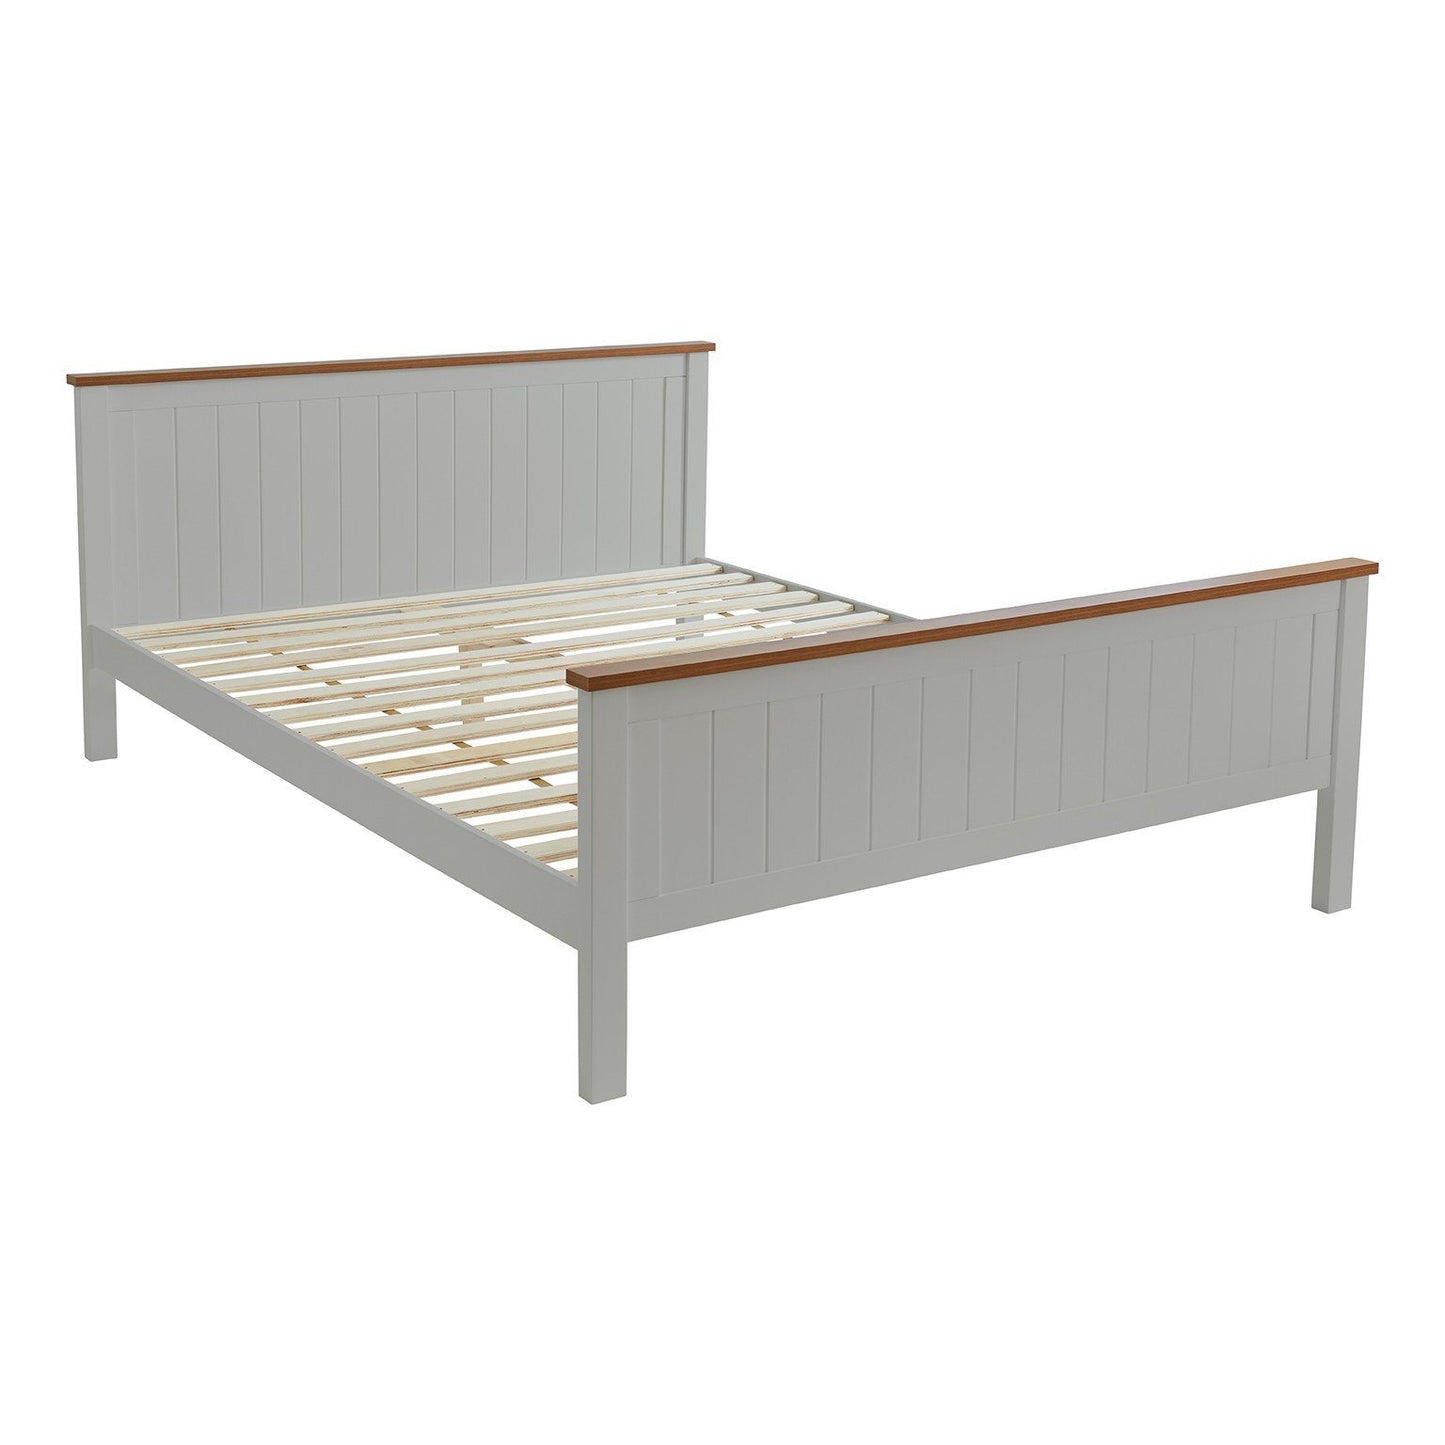 Grey wooden king size bed - Laura James